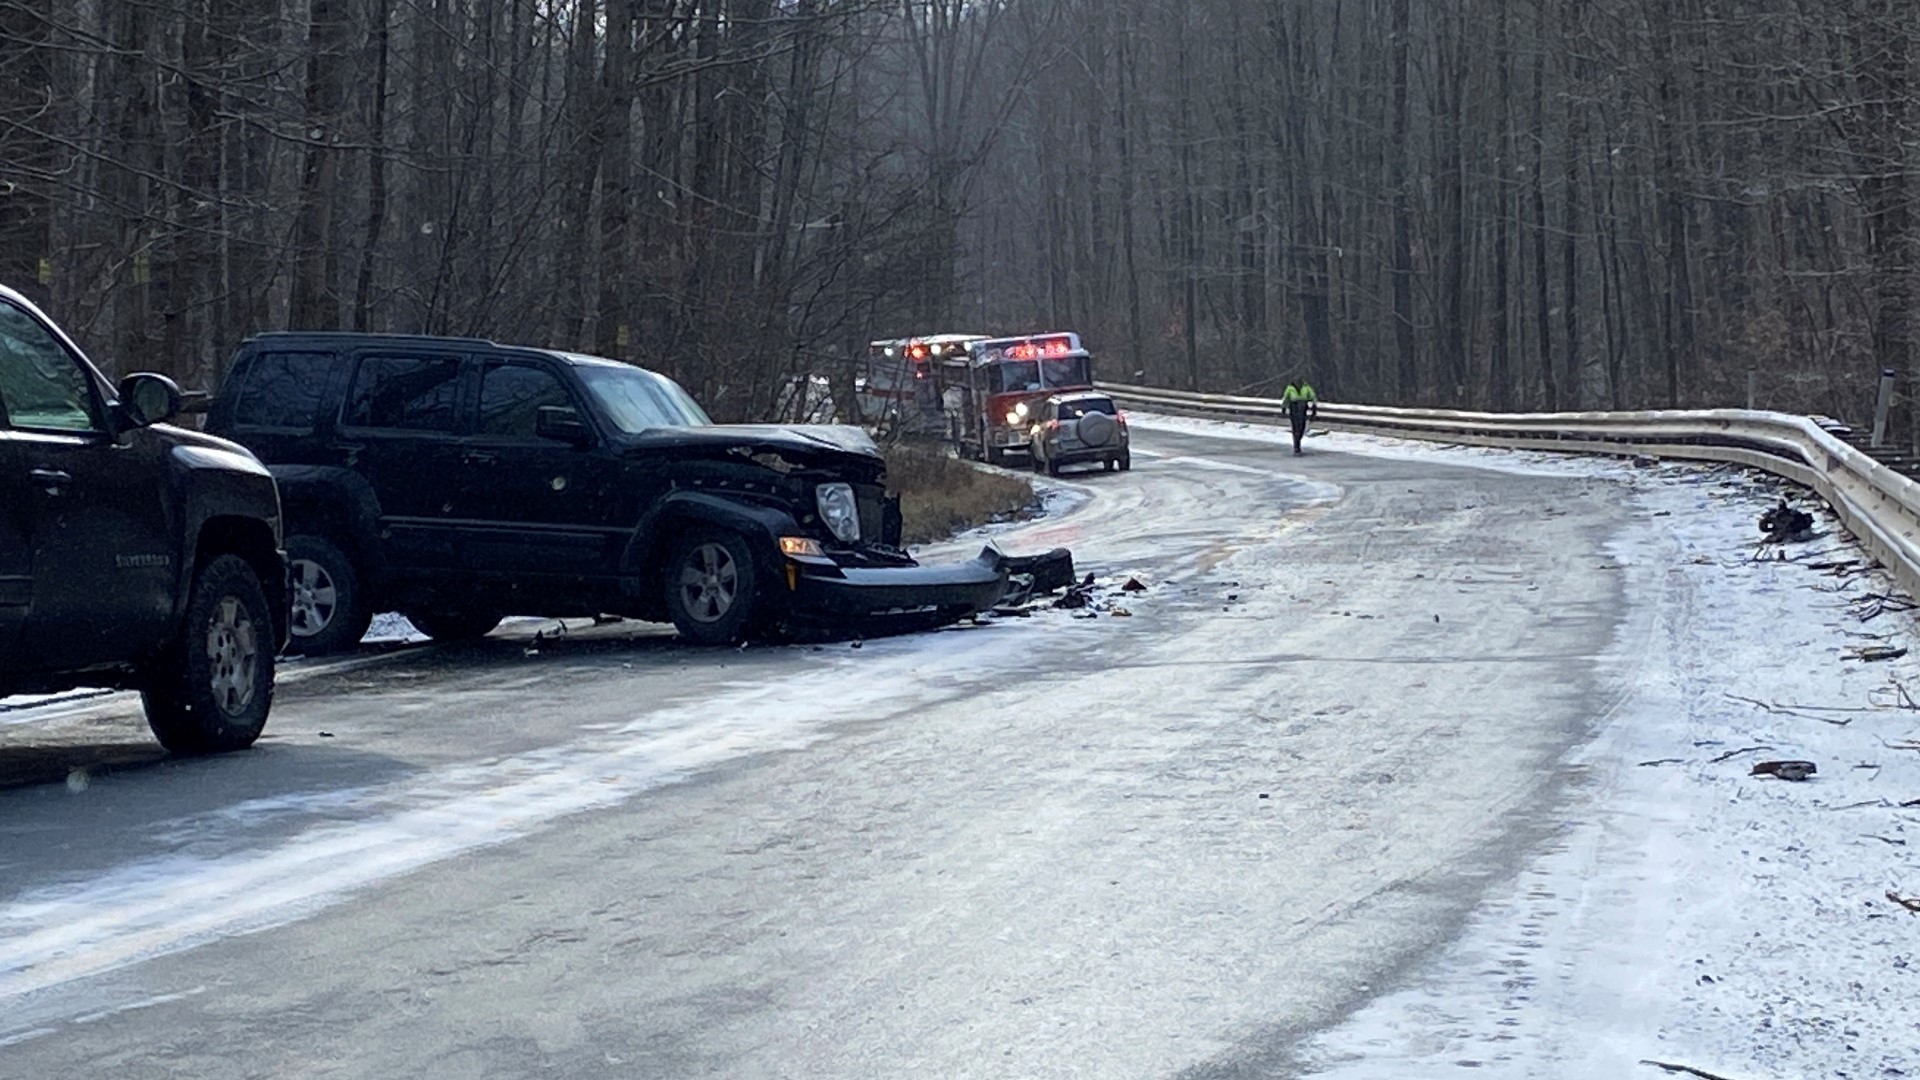 Route 171 between Vandling and Simpson was the scene of the wreck on Wednesday morning.